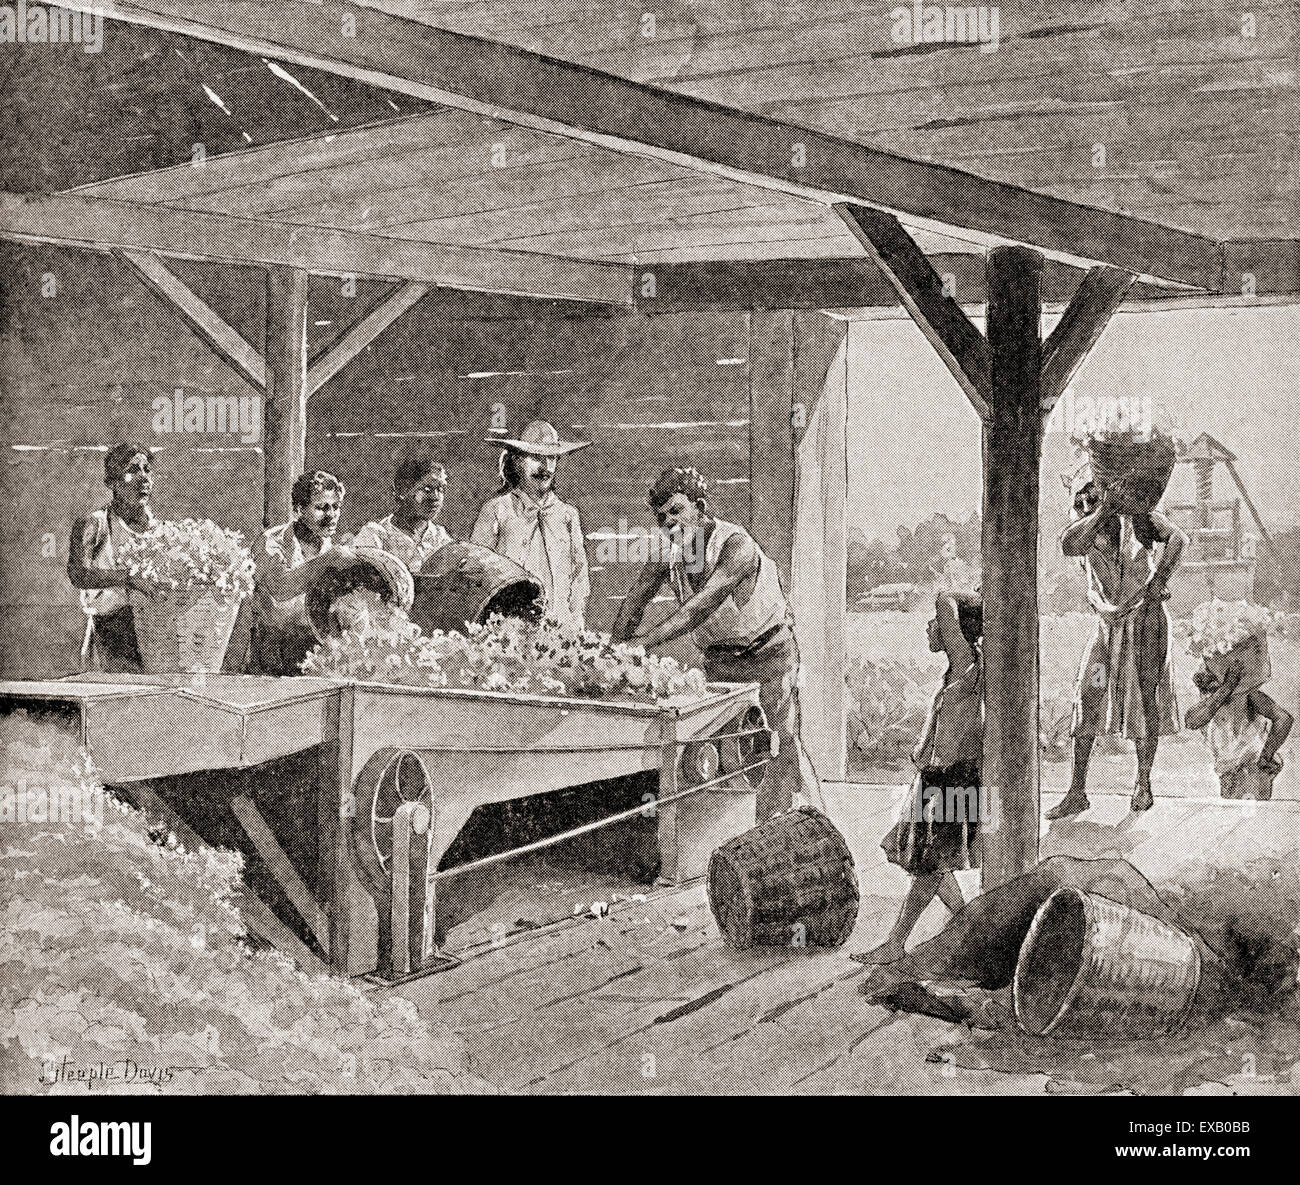 Slaves working with a 19th century cotton gin on a plantation in a southern state of the United States of America. Stock Photo